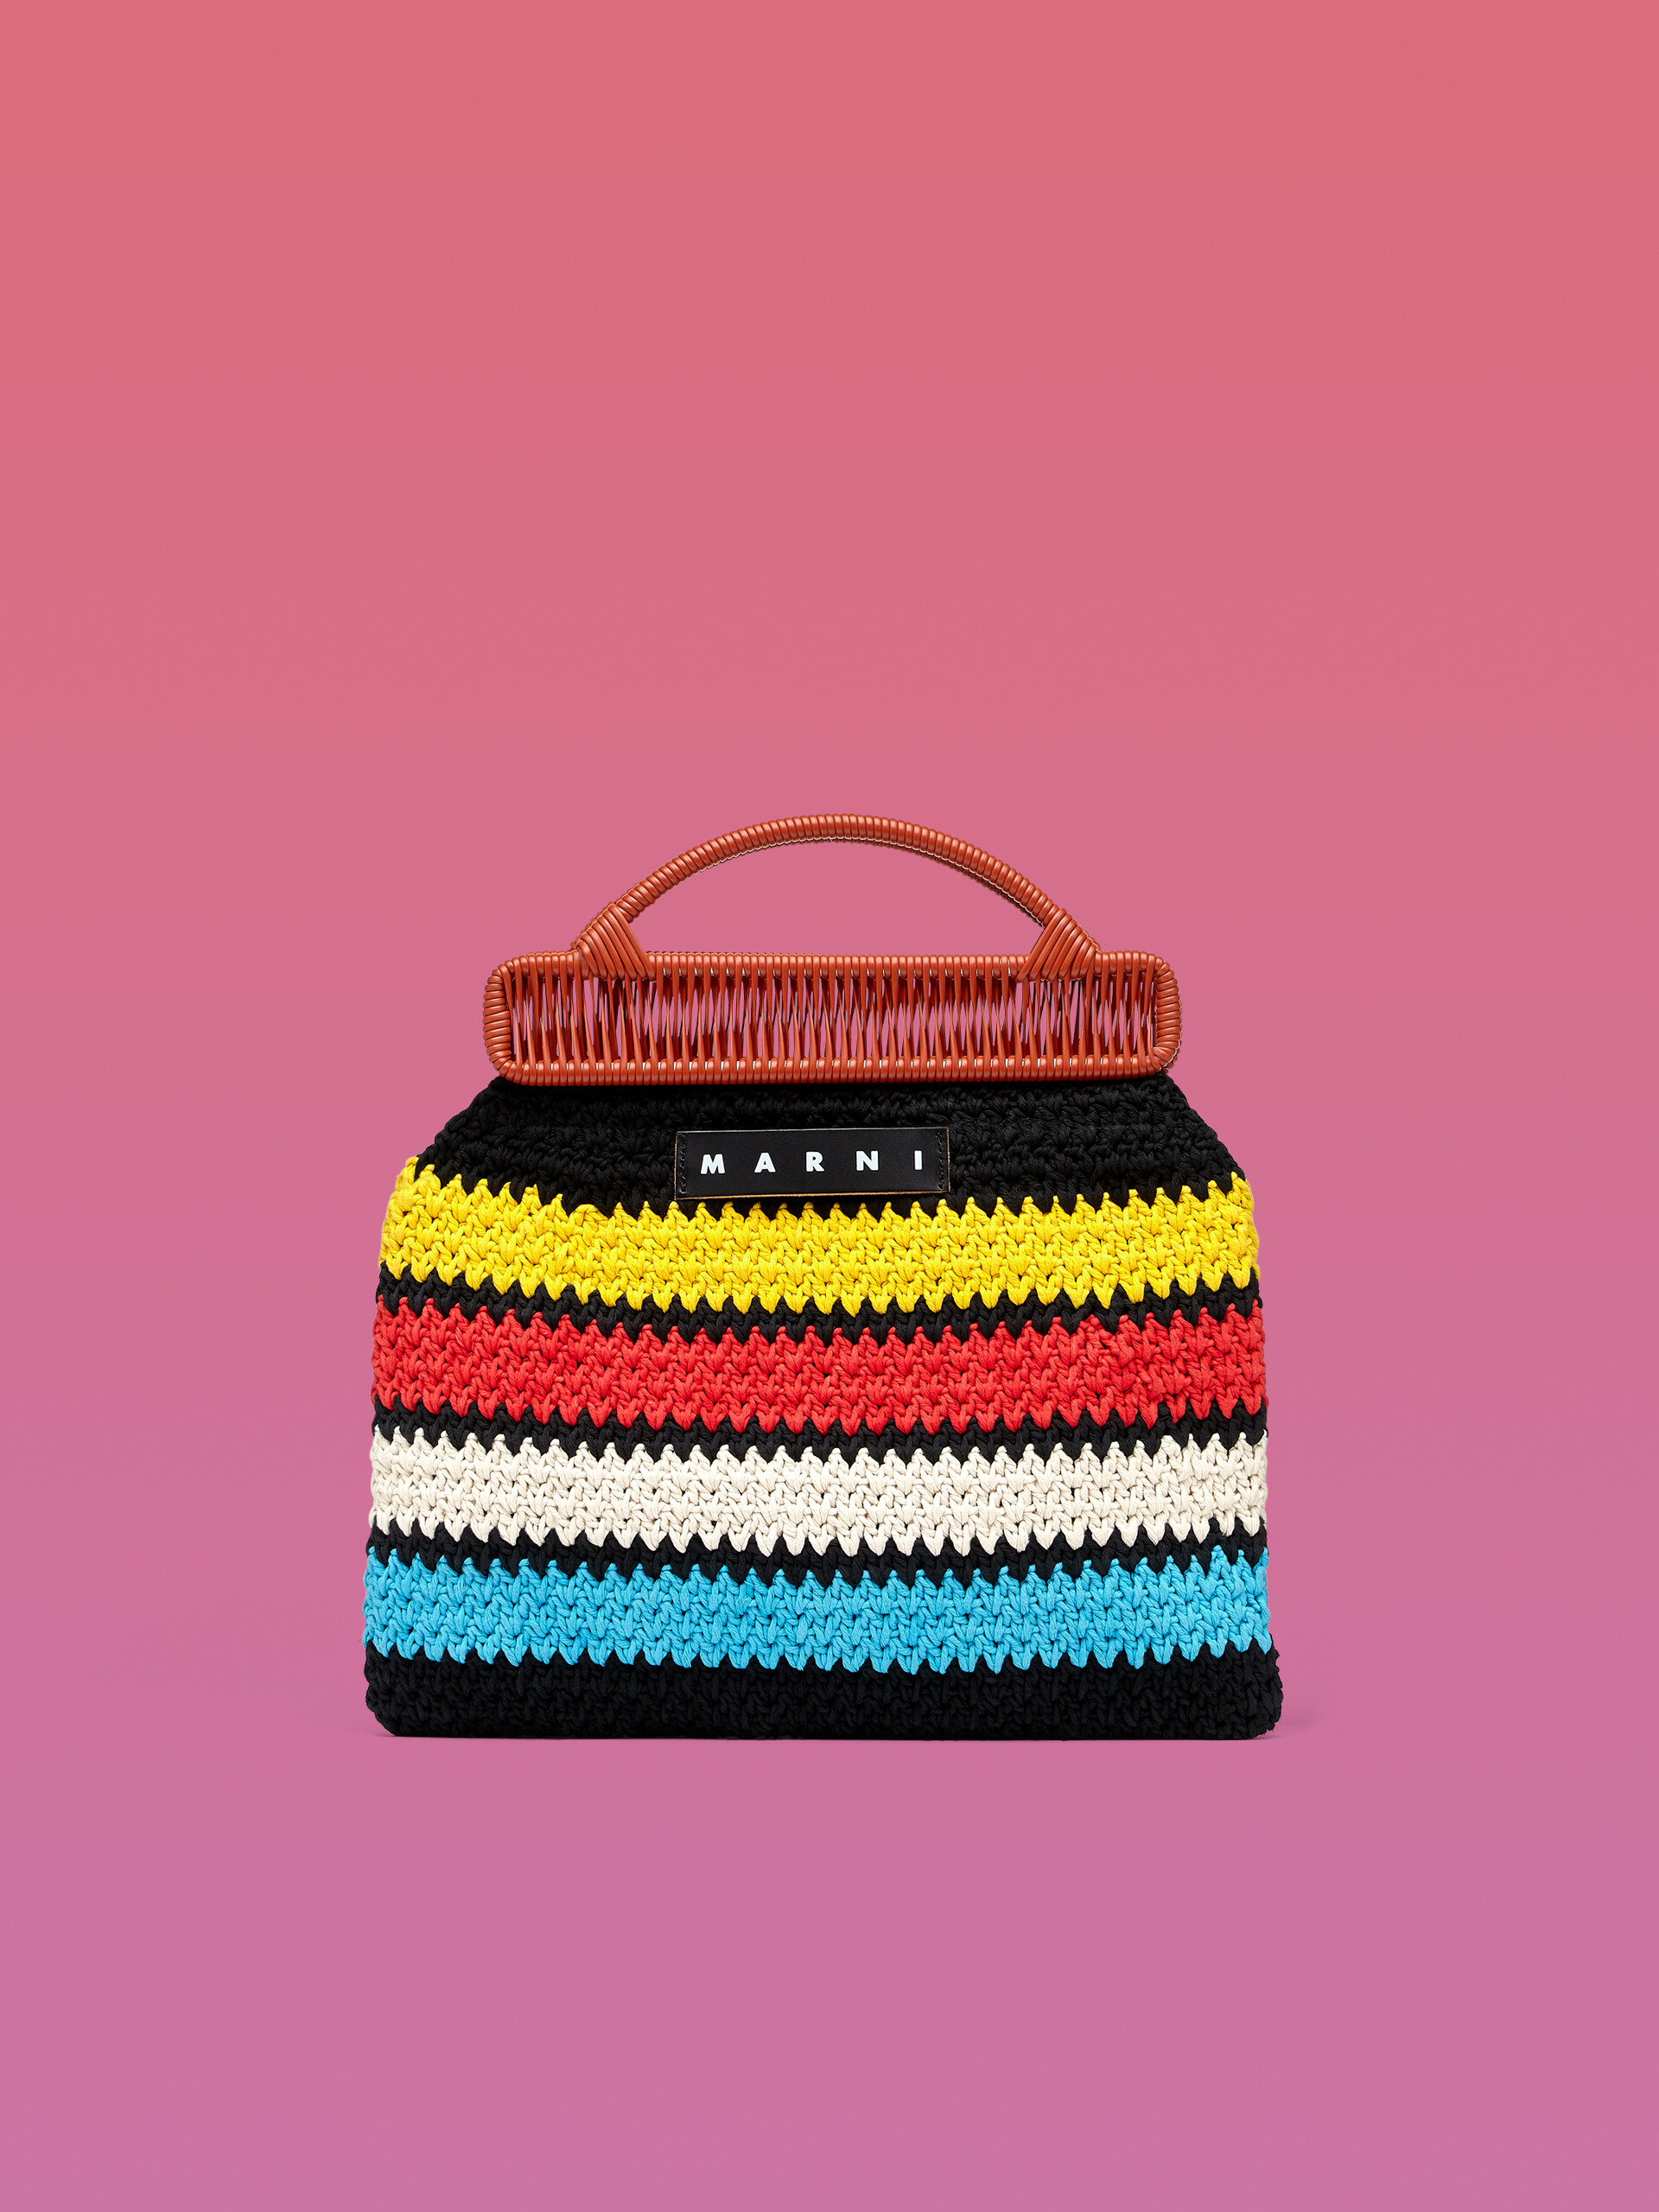 MARNI MARKET frame bag with striped motif in yellow, red, white, pale blue and black crochet cotton blend - Furniture - Image 1